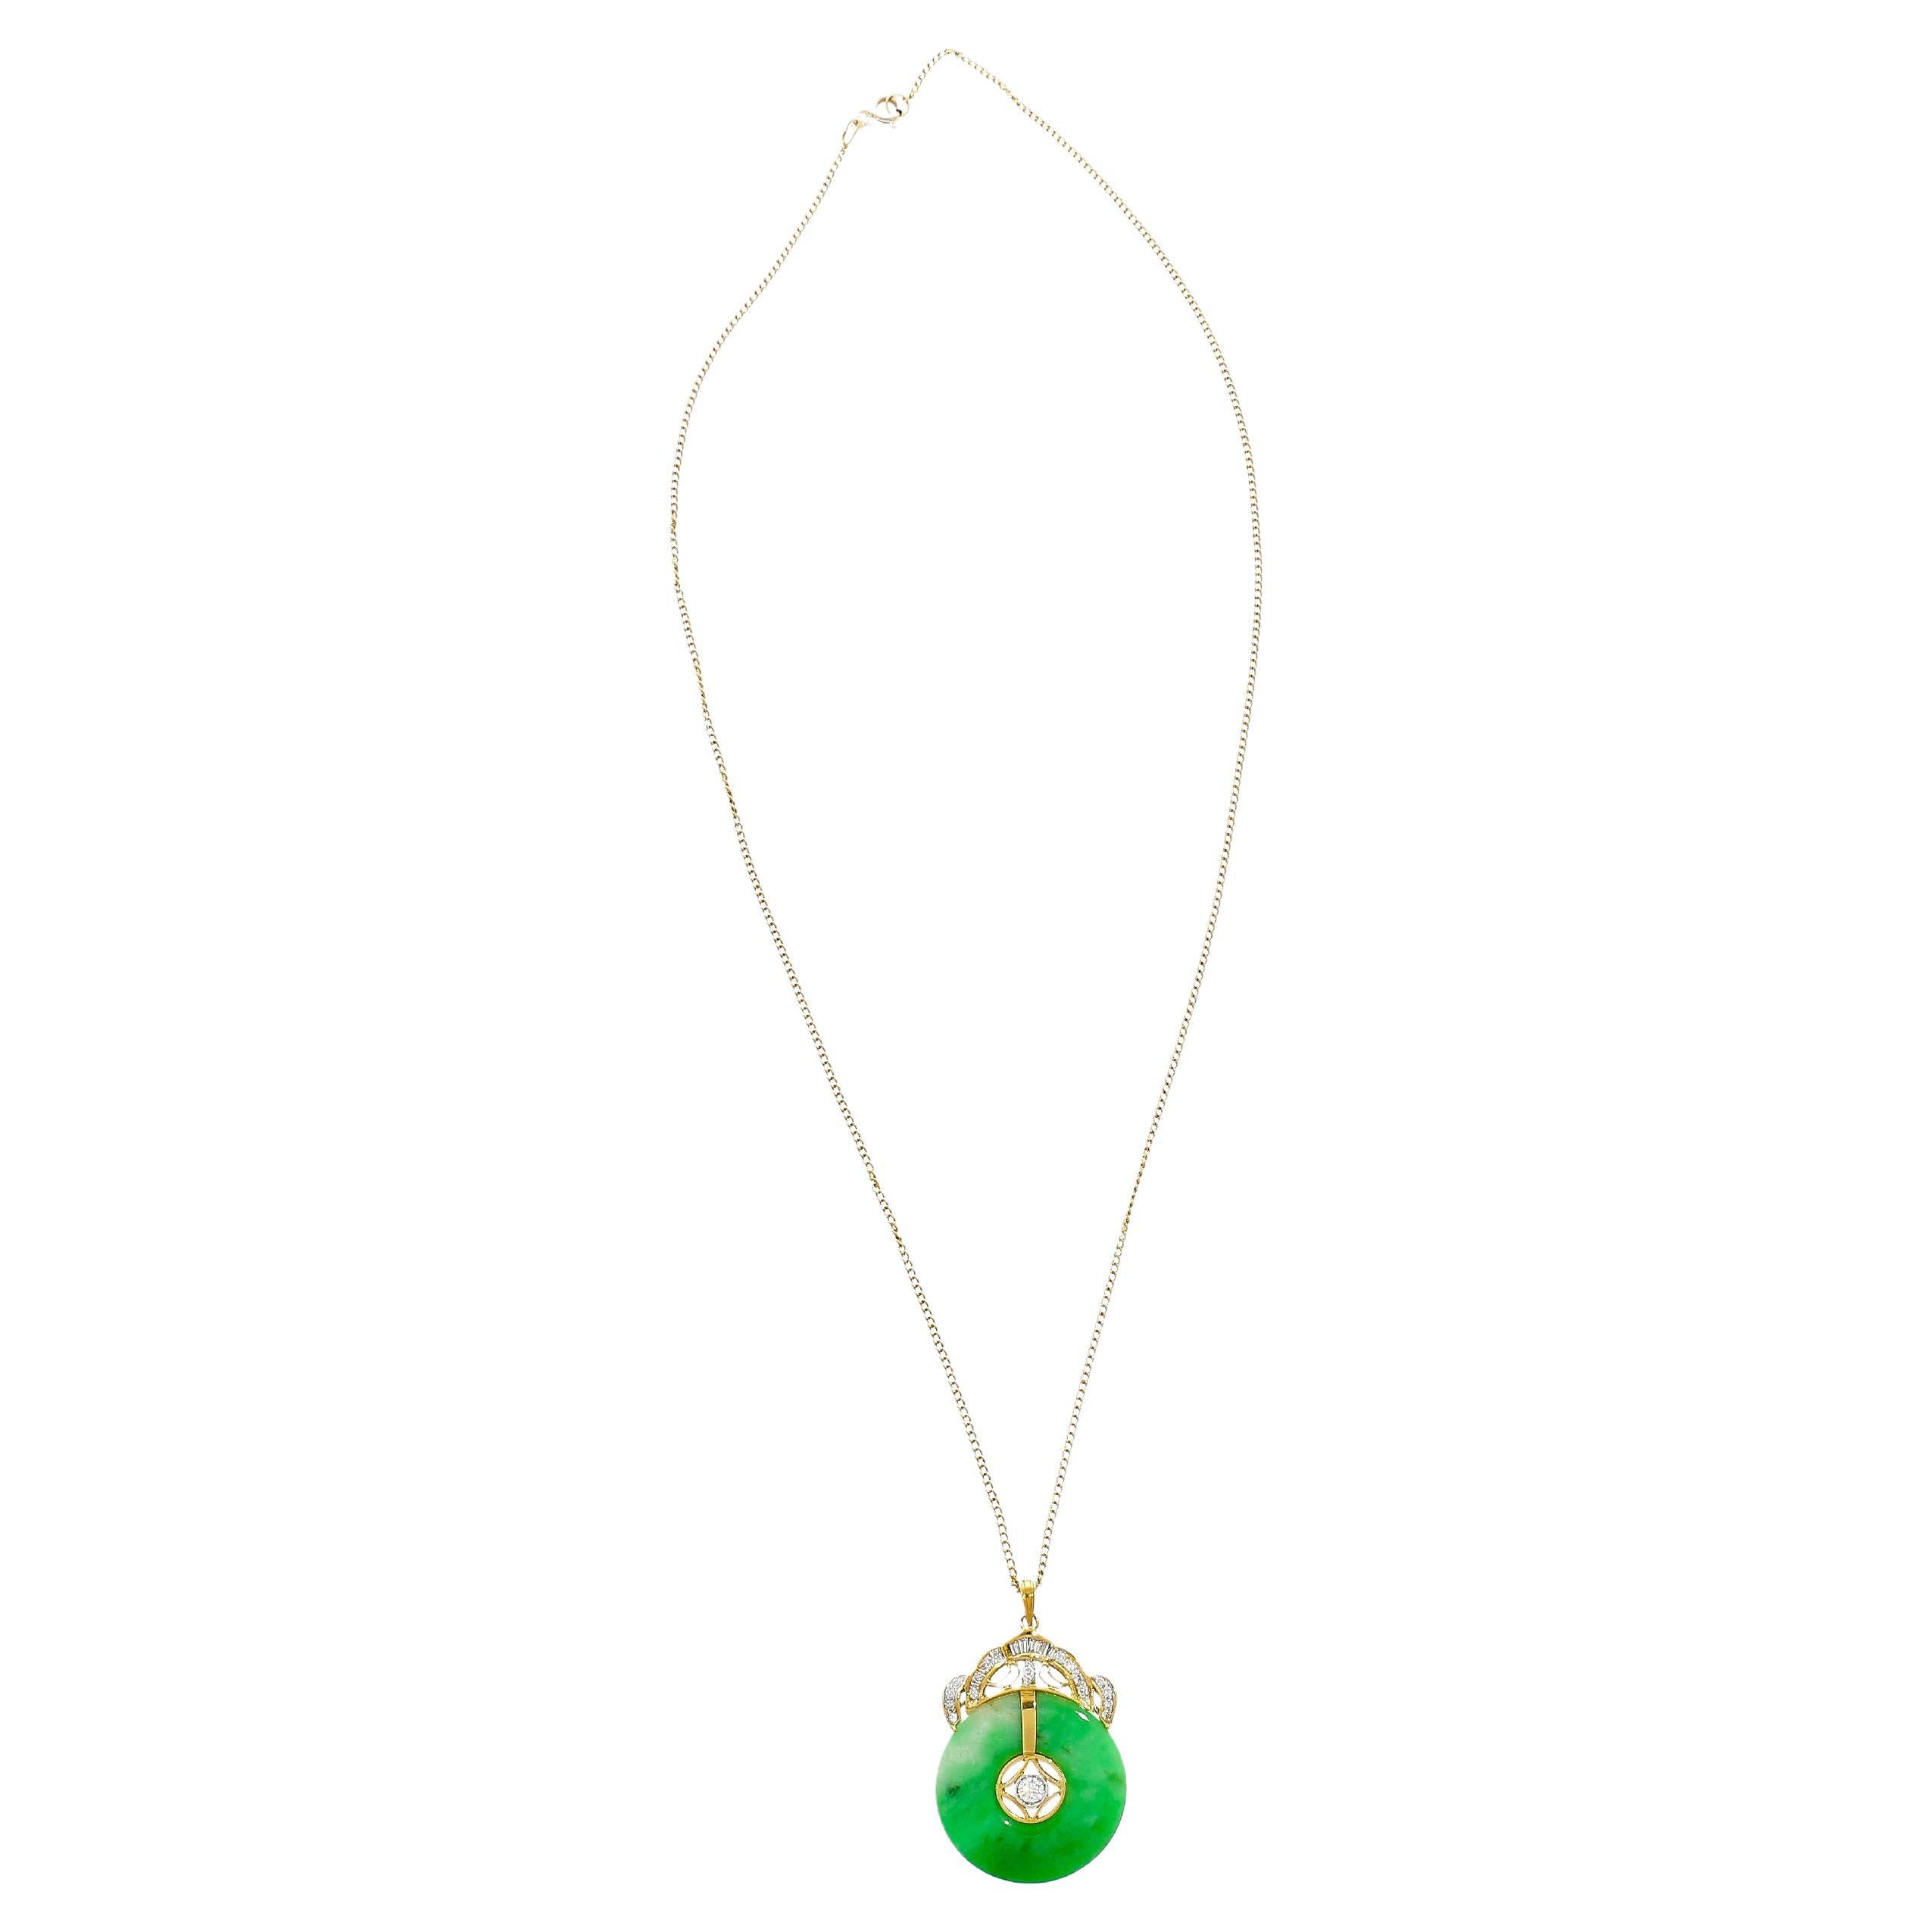 18K Yellow Gold Necklace adorned with a mesmerizing circular green Jadeite Jade pendant. Embellished with a shimmering set of white baguette and round cut diamonds. The gems are securely set, ensuring both their stunning beauty and longevity. The